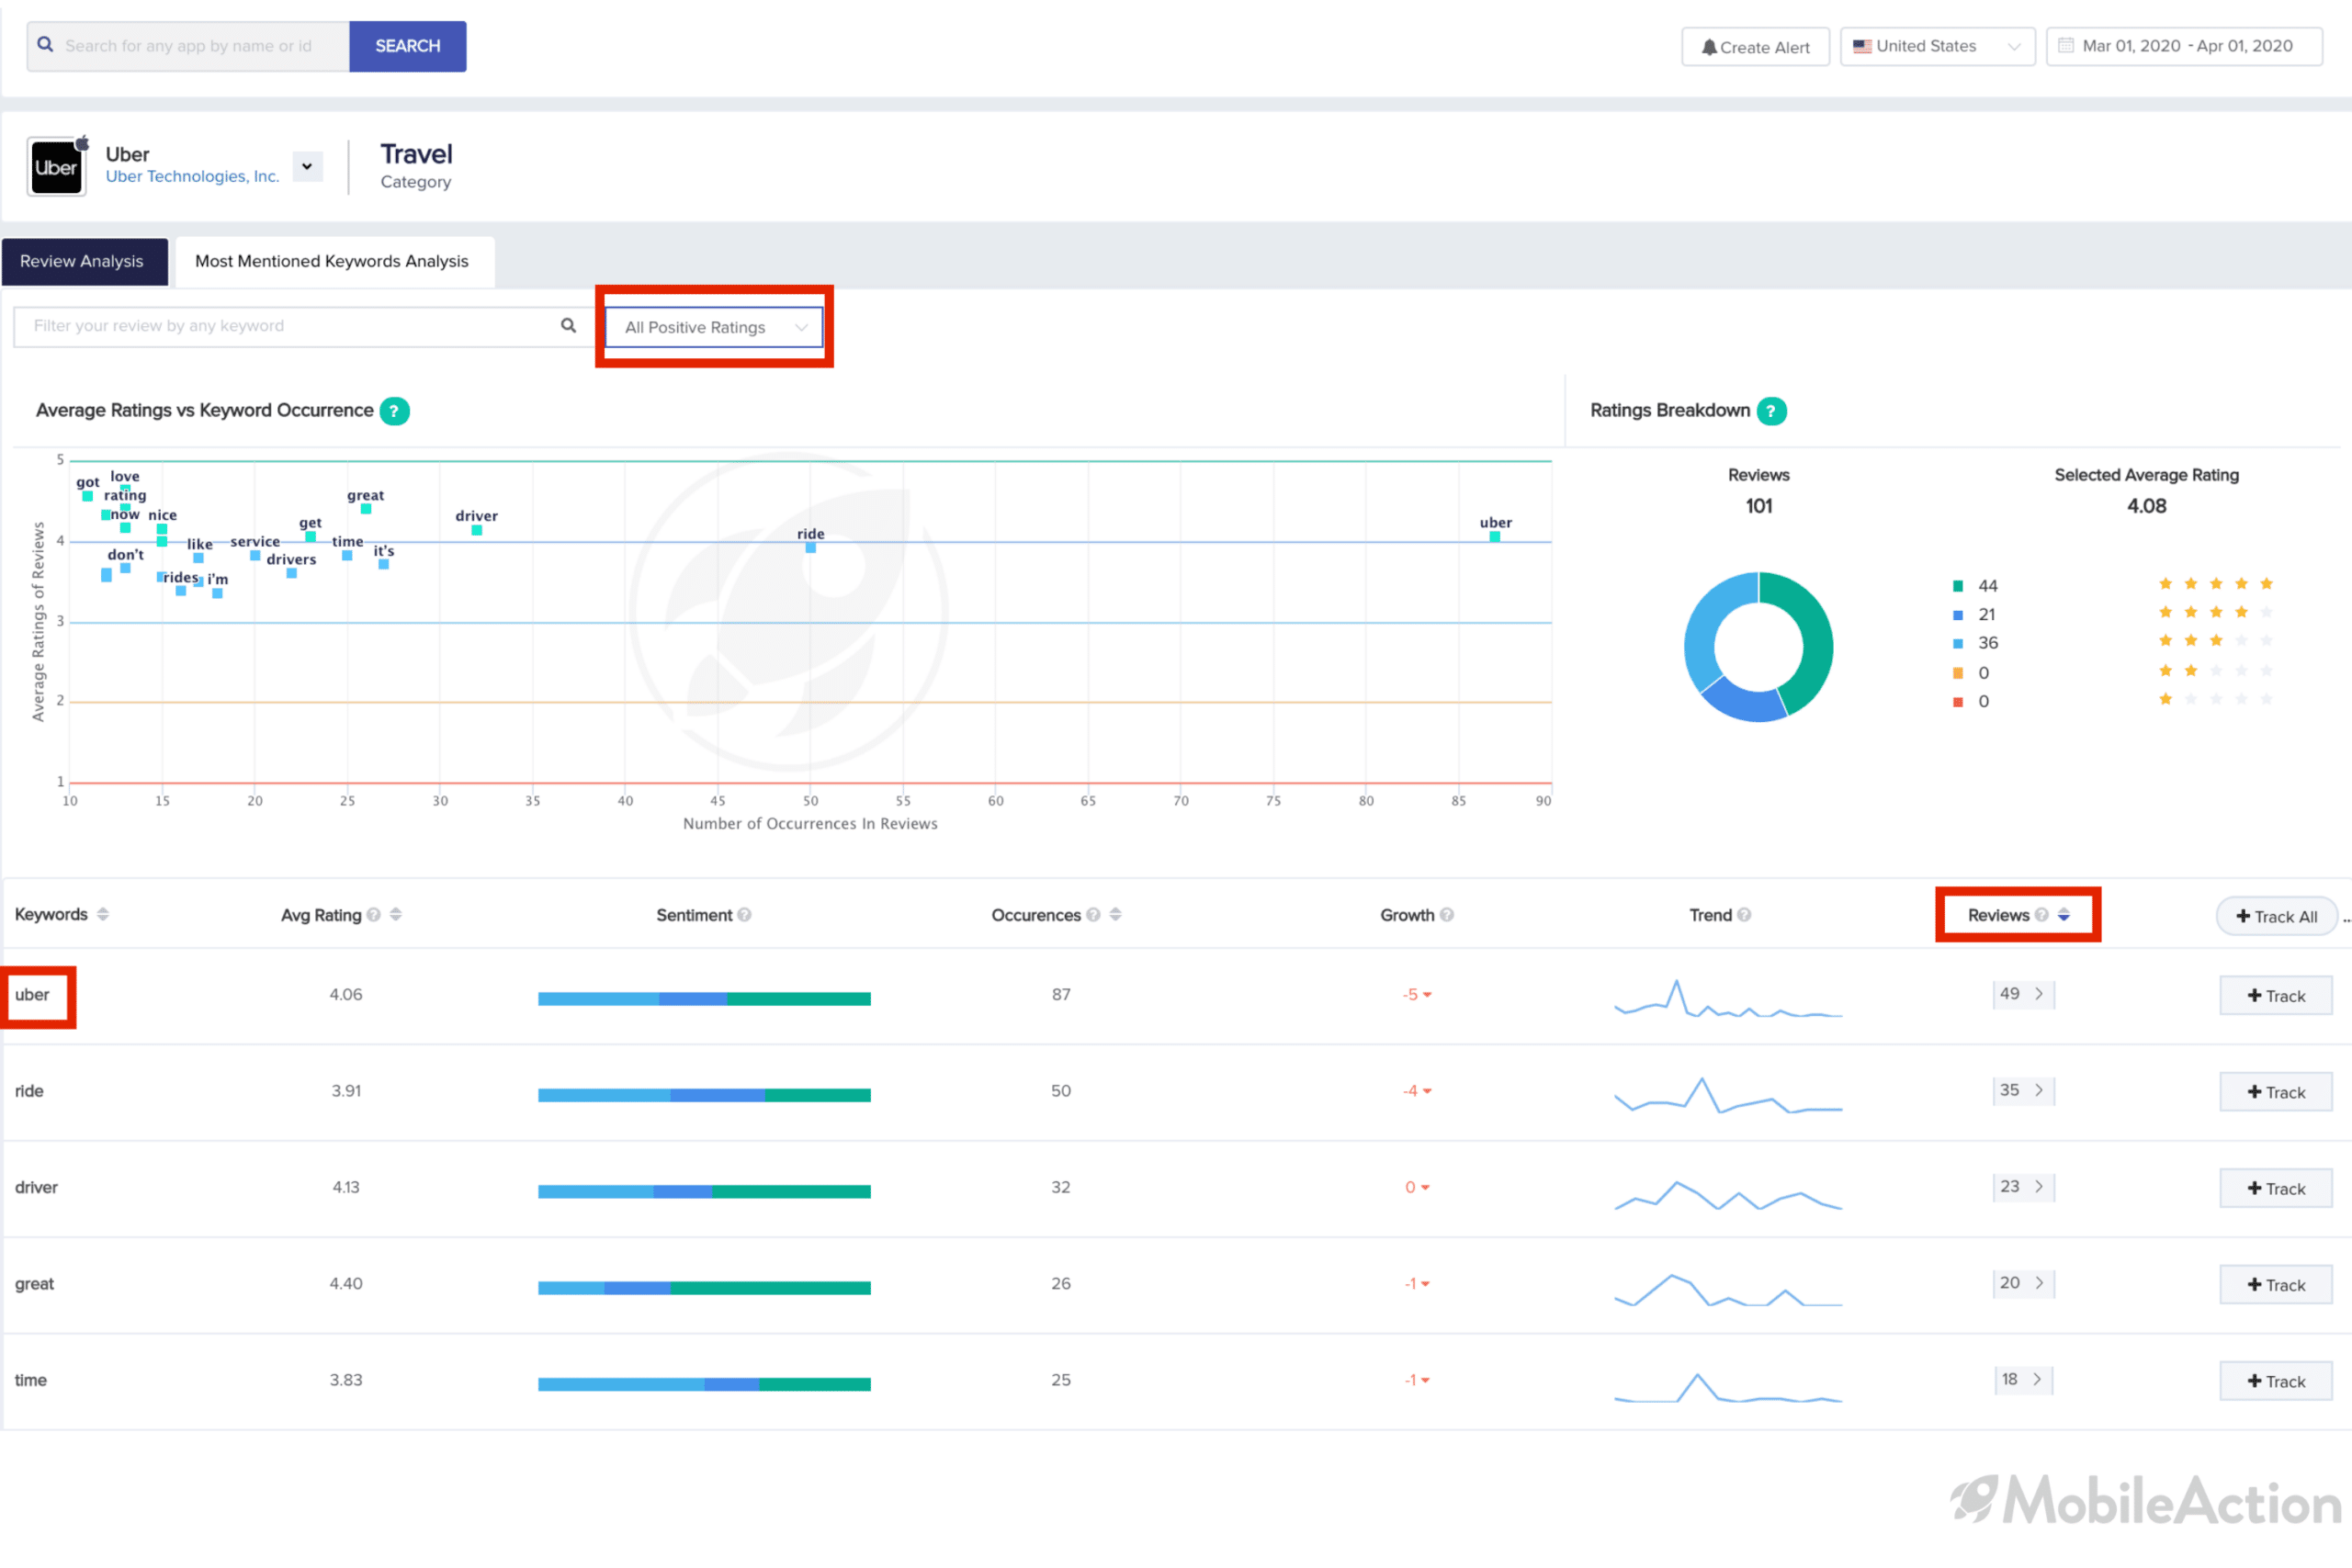 most-mentioned-keyword-analysis-uber